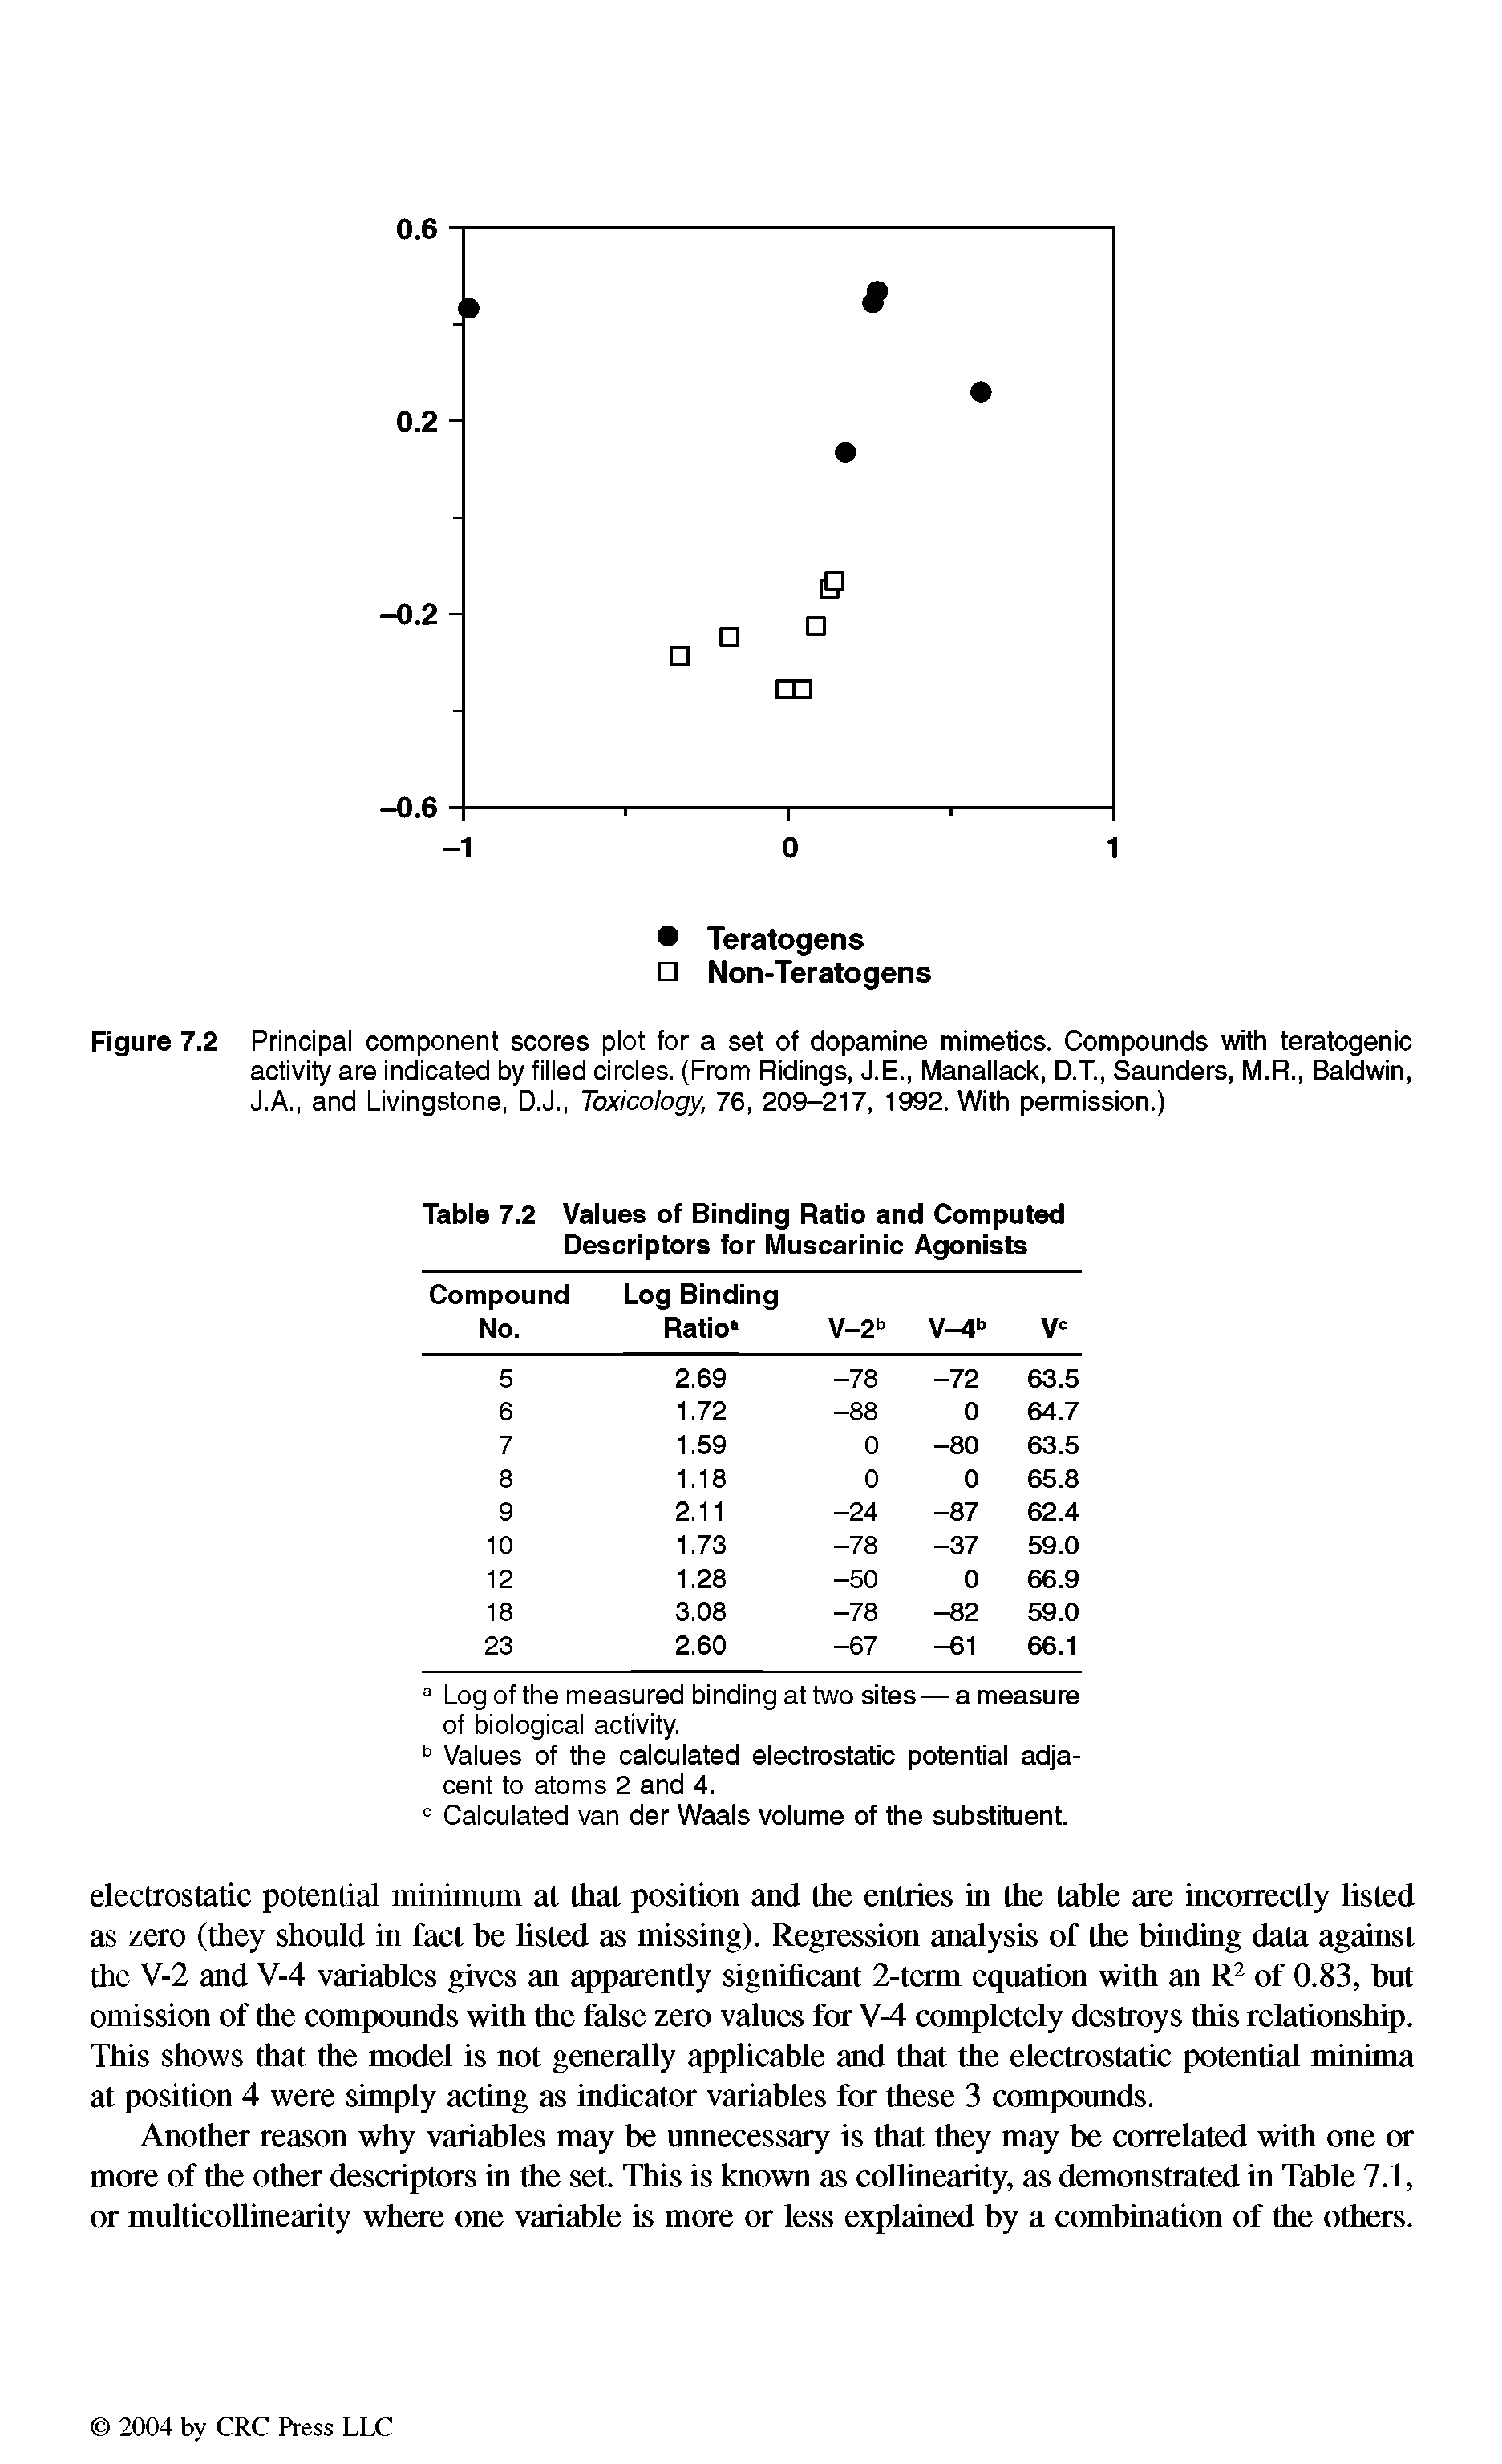 Table 7.2 Values of Binding Ratio and Computed Descriptors for Muscarinic Agonists...